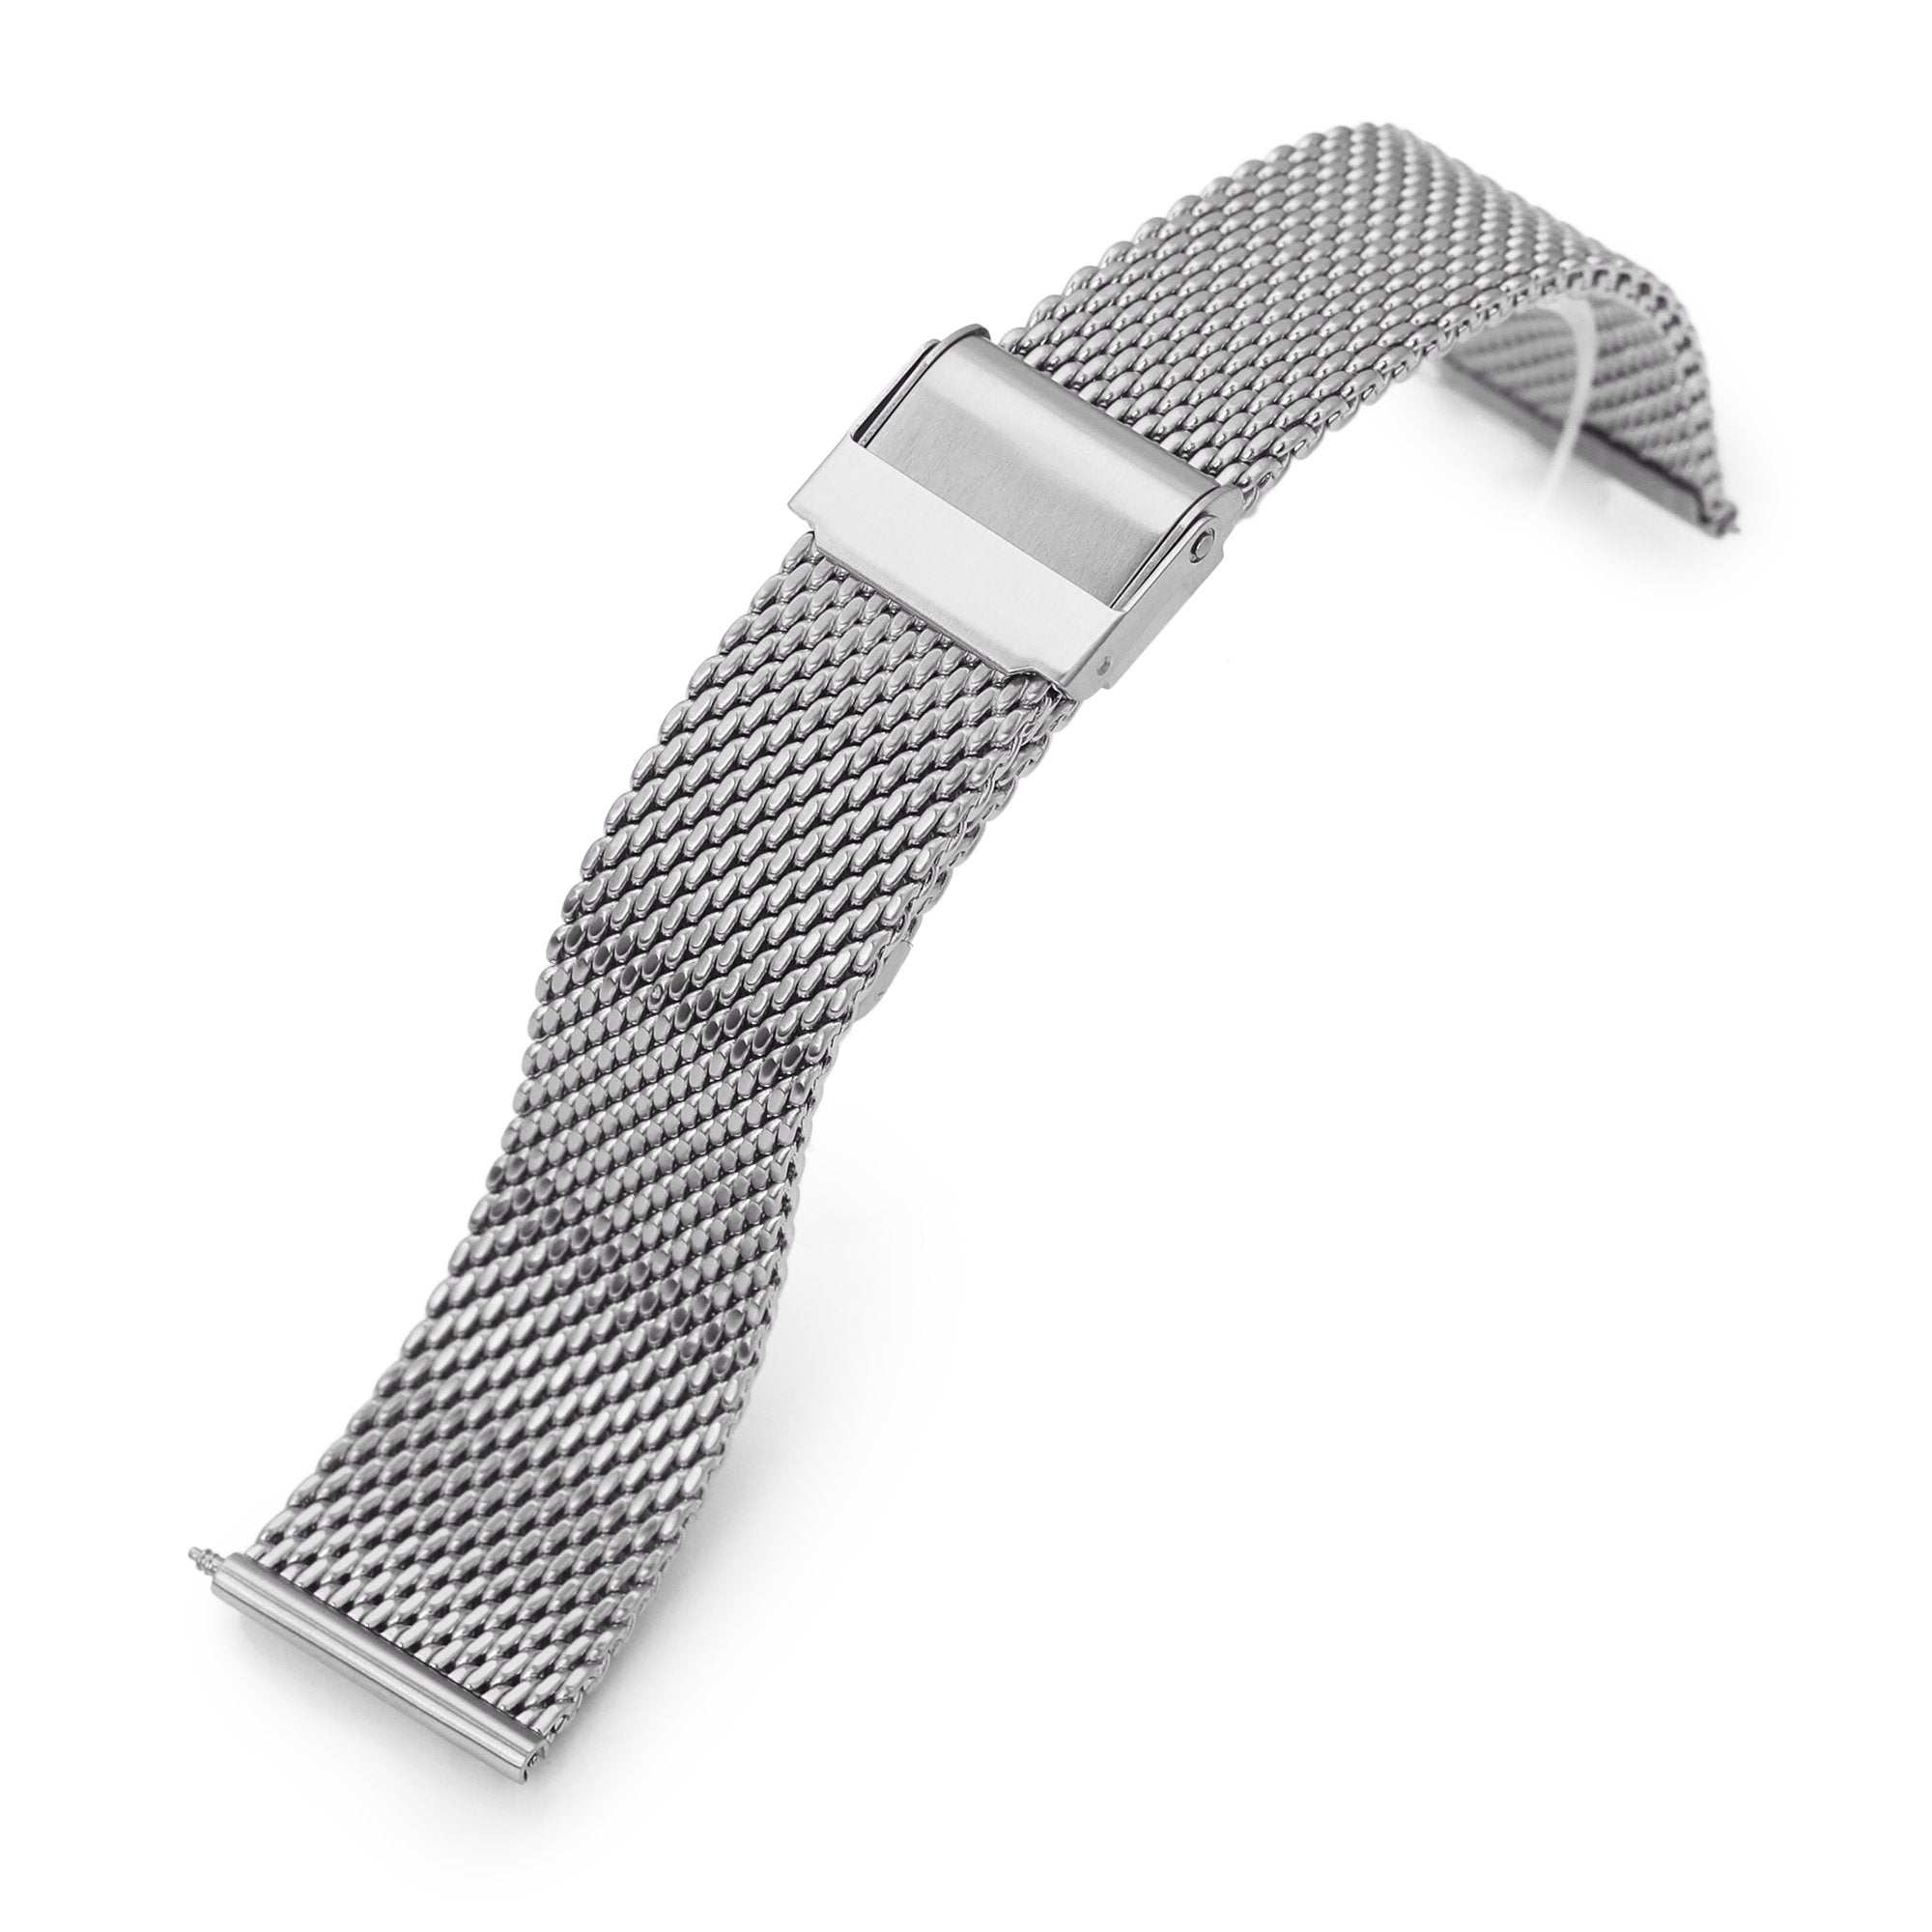 Watchdives Watch Band Stainless Steel Mesh Straps for Men, 20mm Mesh  Bracelet Adjustable Woven Metal Straps (20mm) : Amazon.in: Watches